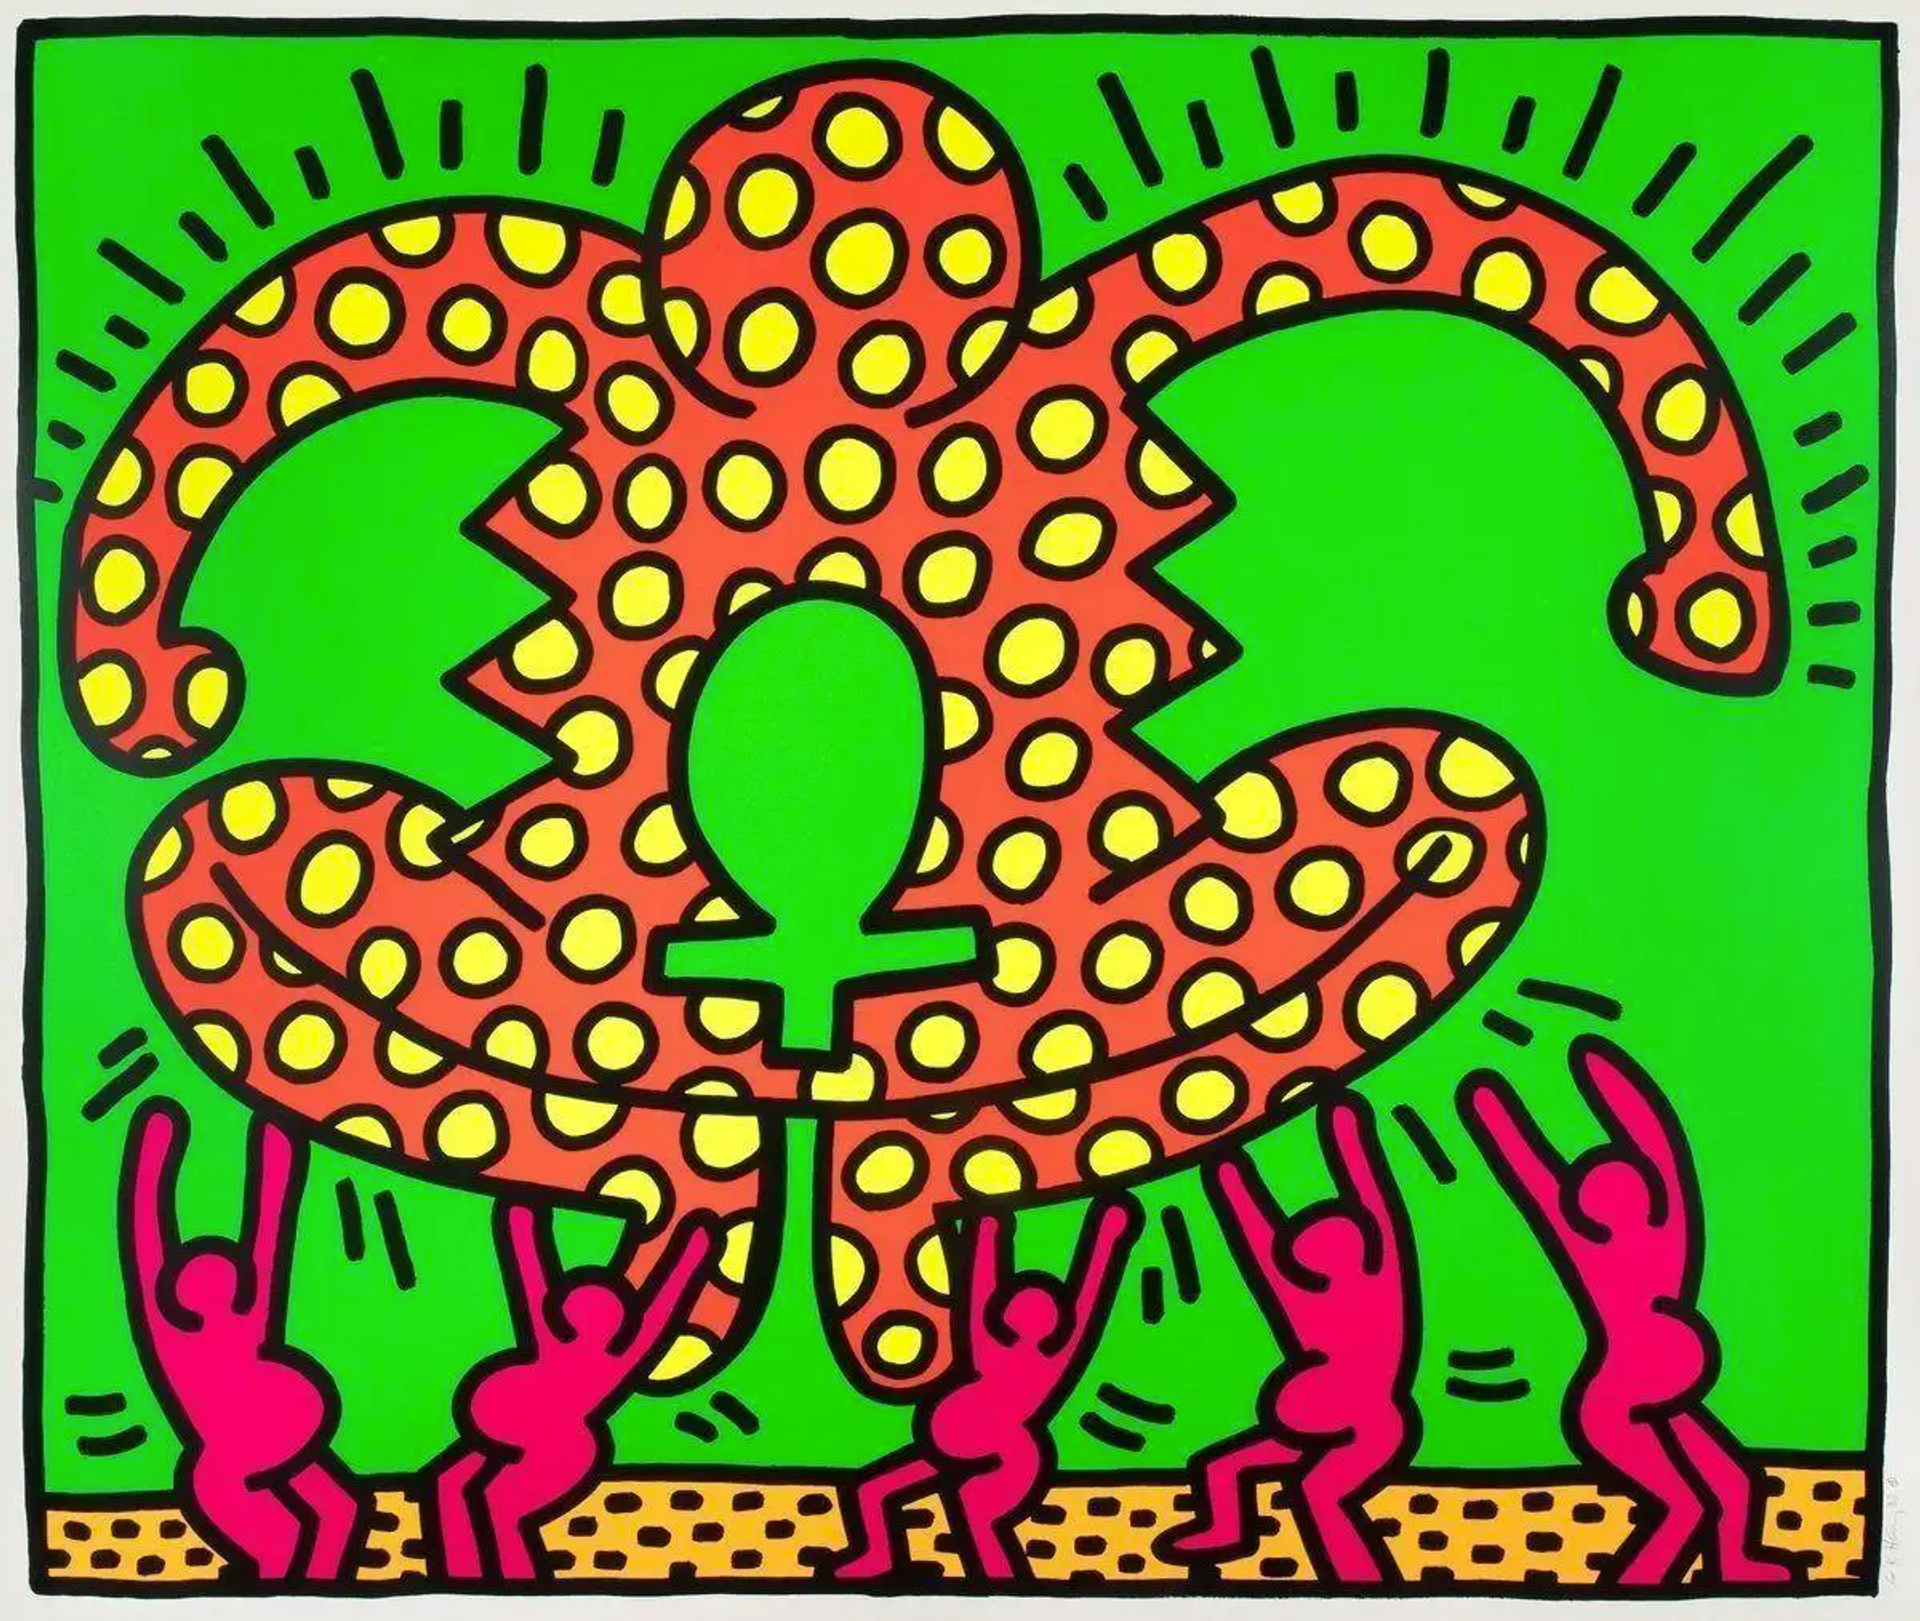 Keith Haring’s Fertility 5. A Pop Art screenprint of a red figure with yellow polka dots with pink pregnant figures lifting her up. 